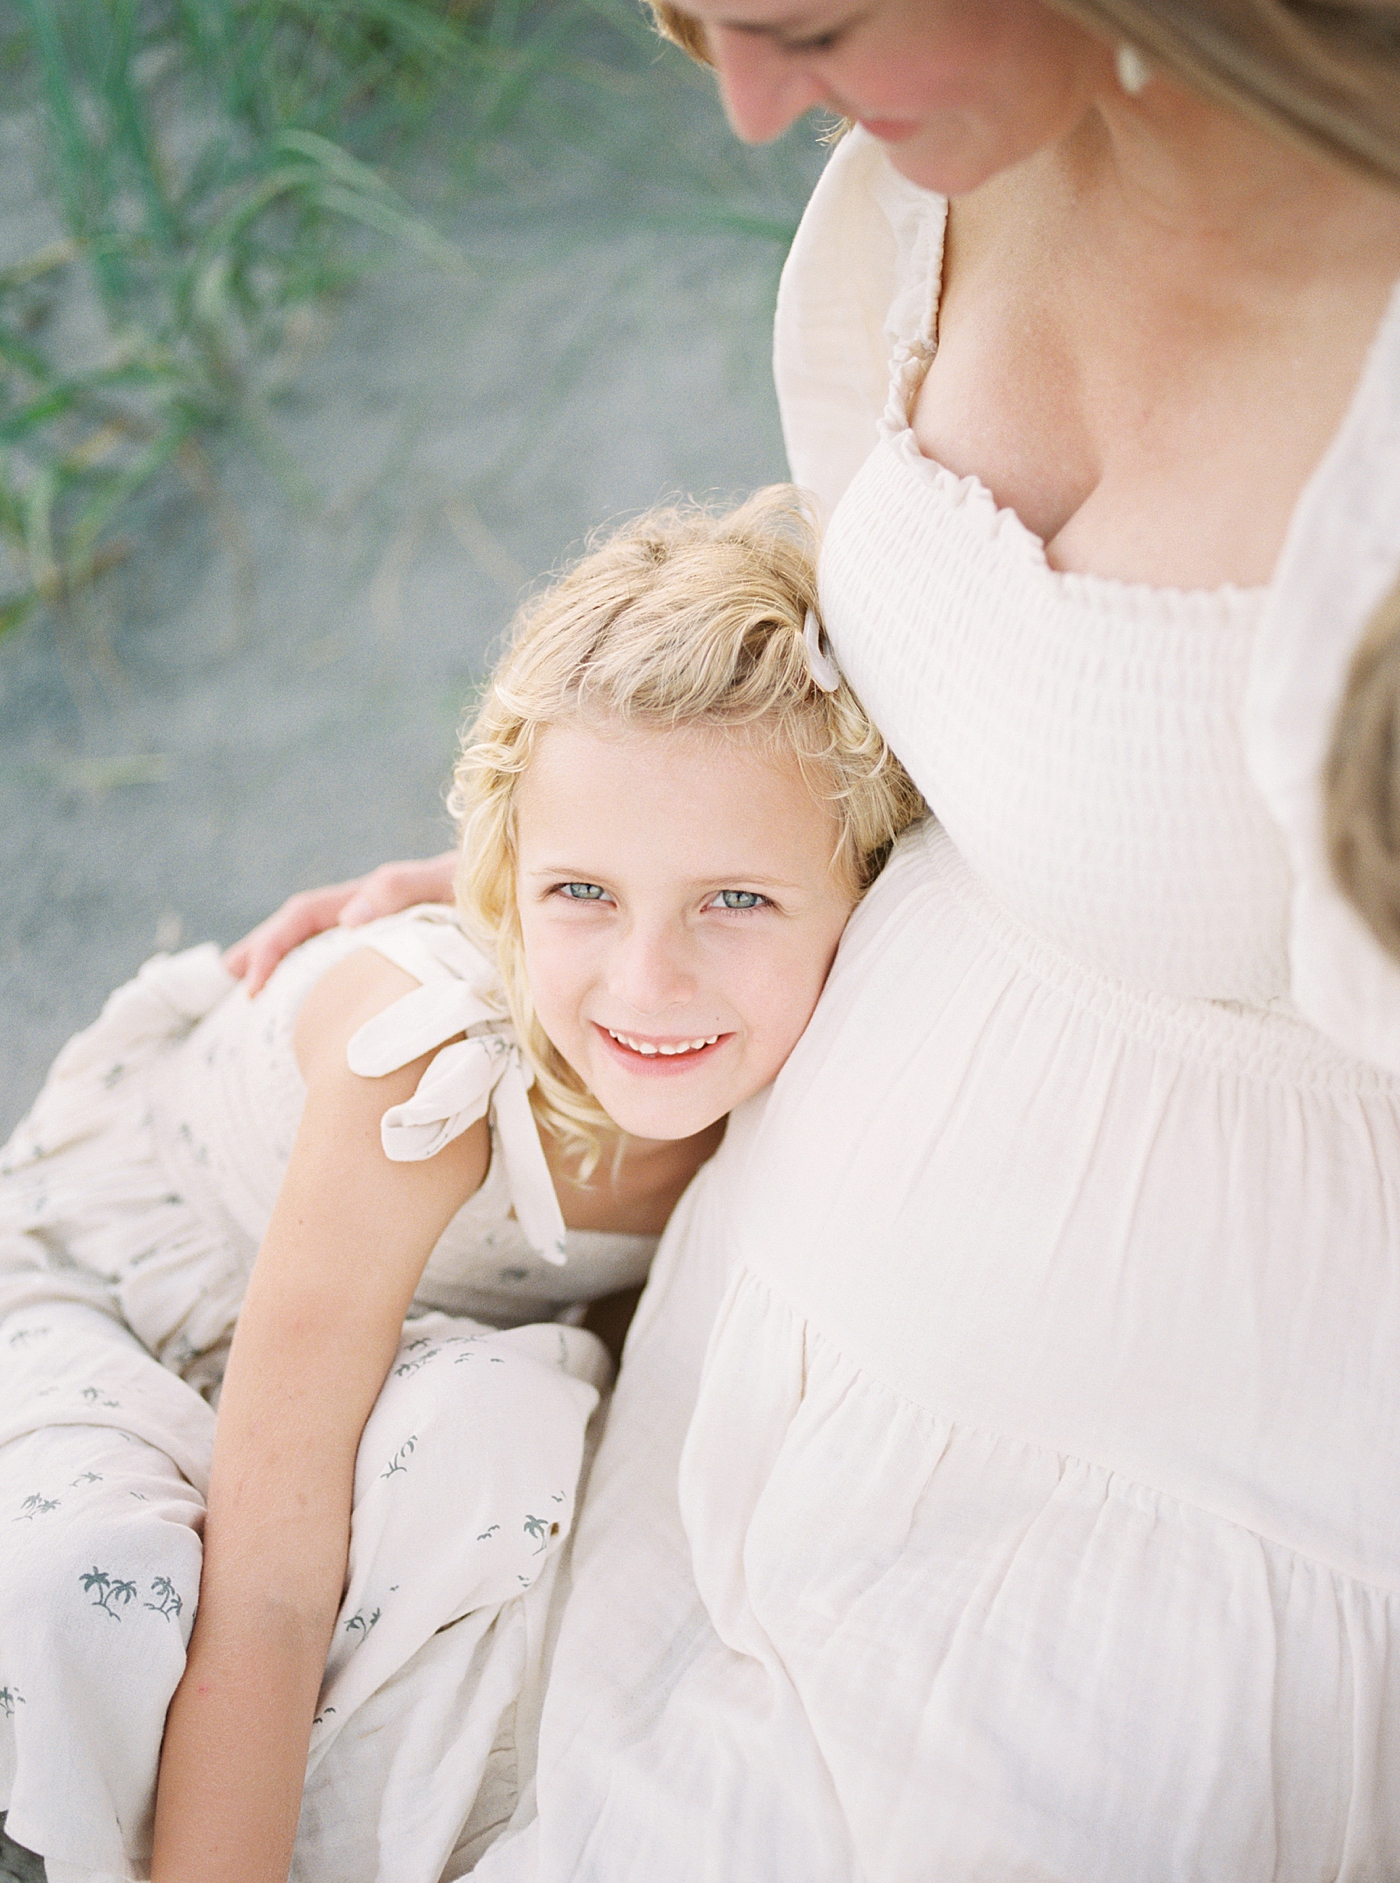 Detail of little girl smiling and hugging her mom during their Maternity Session at Folly Beach | Image by Caitlyn Motycka